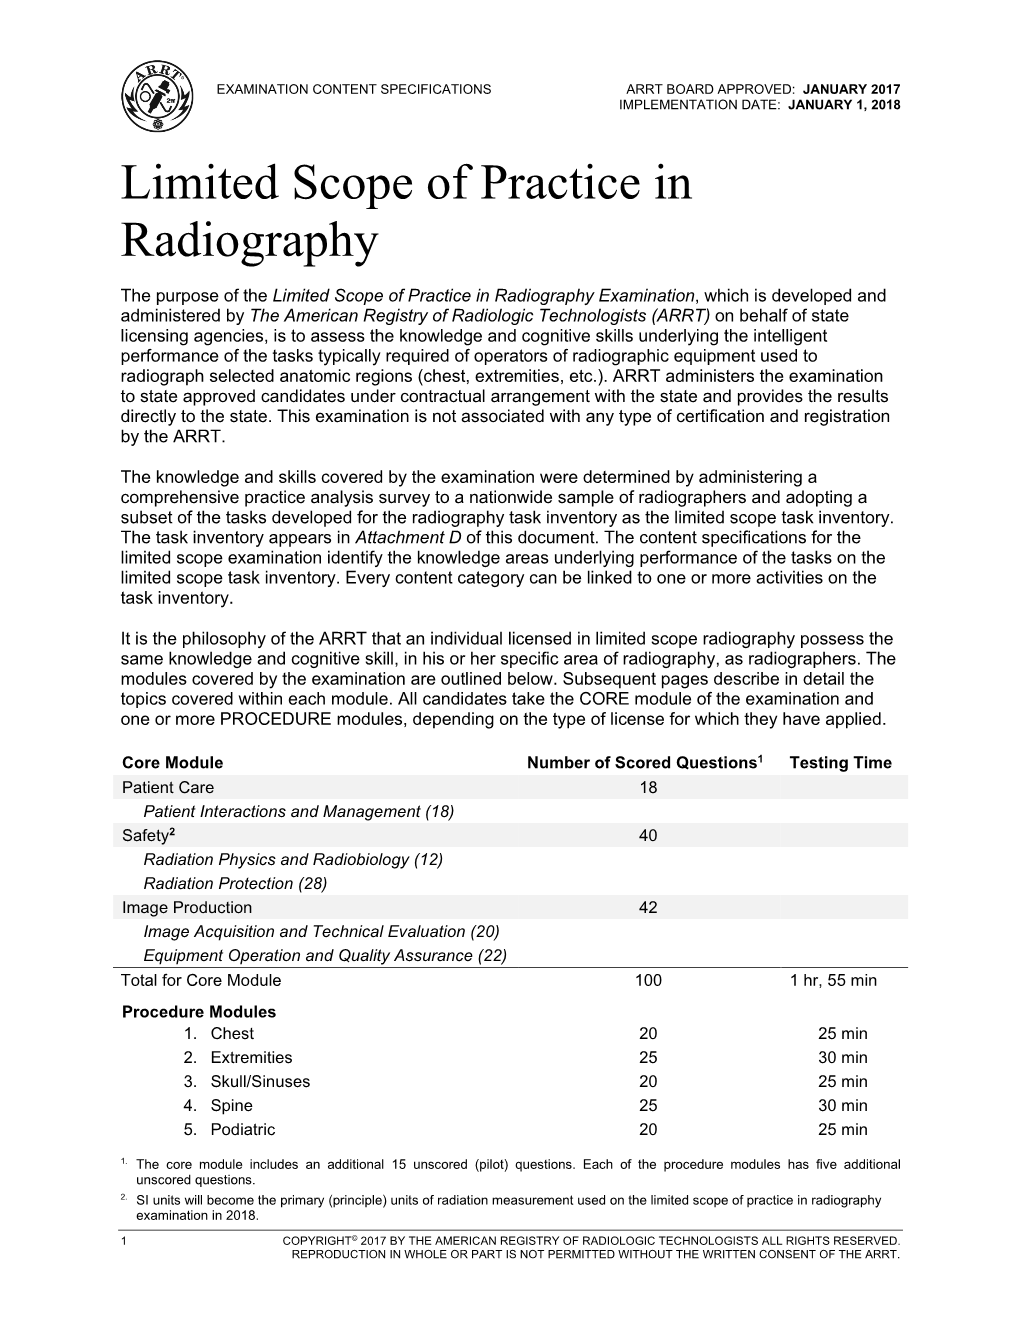 Limited Scope of Practice in Radiography